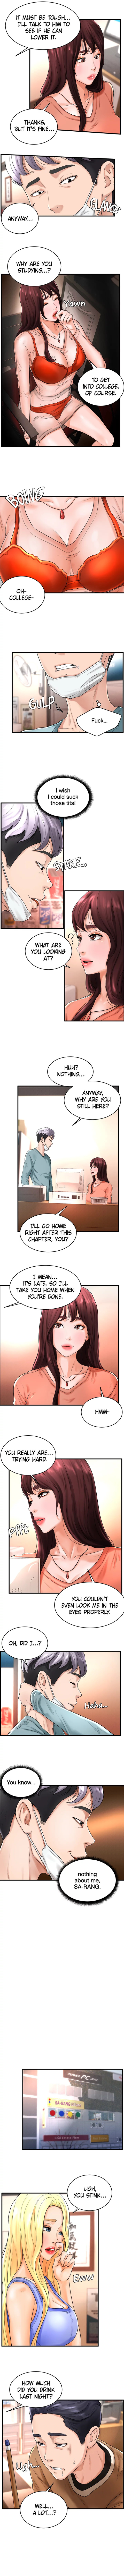 Billiard Room Love - Chapter 10 Page 4